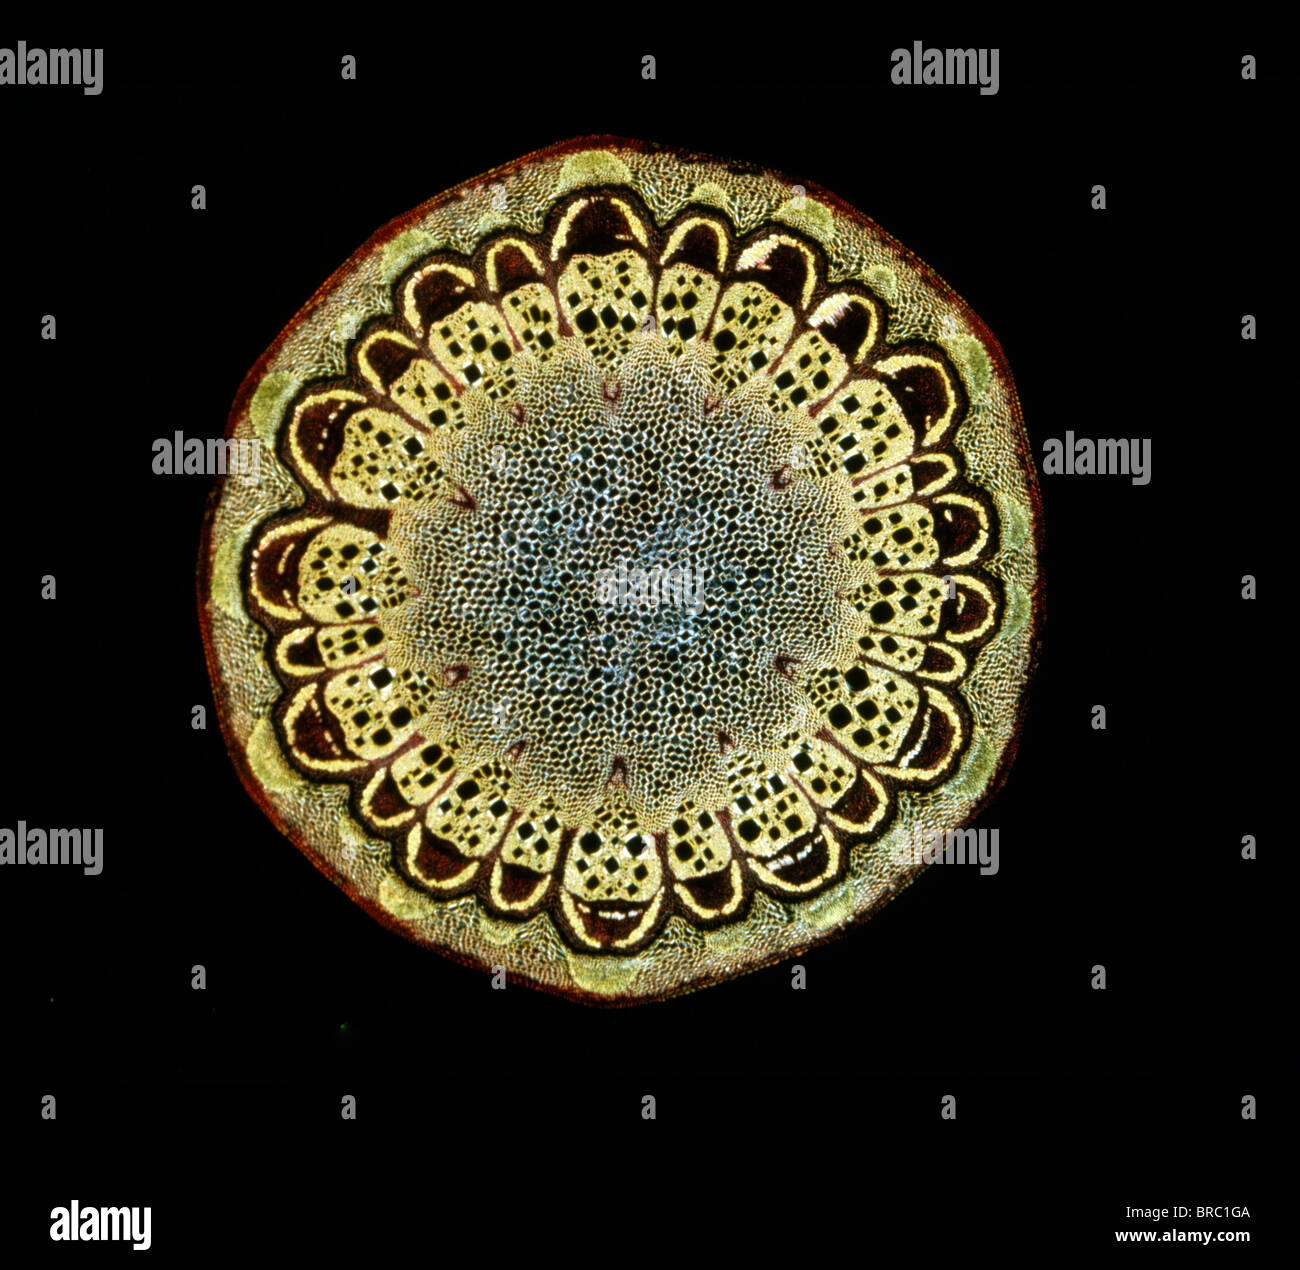 Light Micrograph (LM) of a transverse section of a stem of Fragrant Virgin's Bower (Clematis flammula) stem, magnification x30 Stock Photo